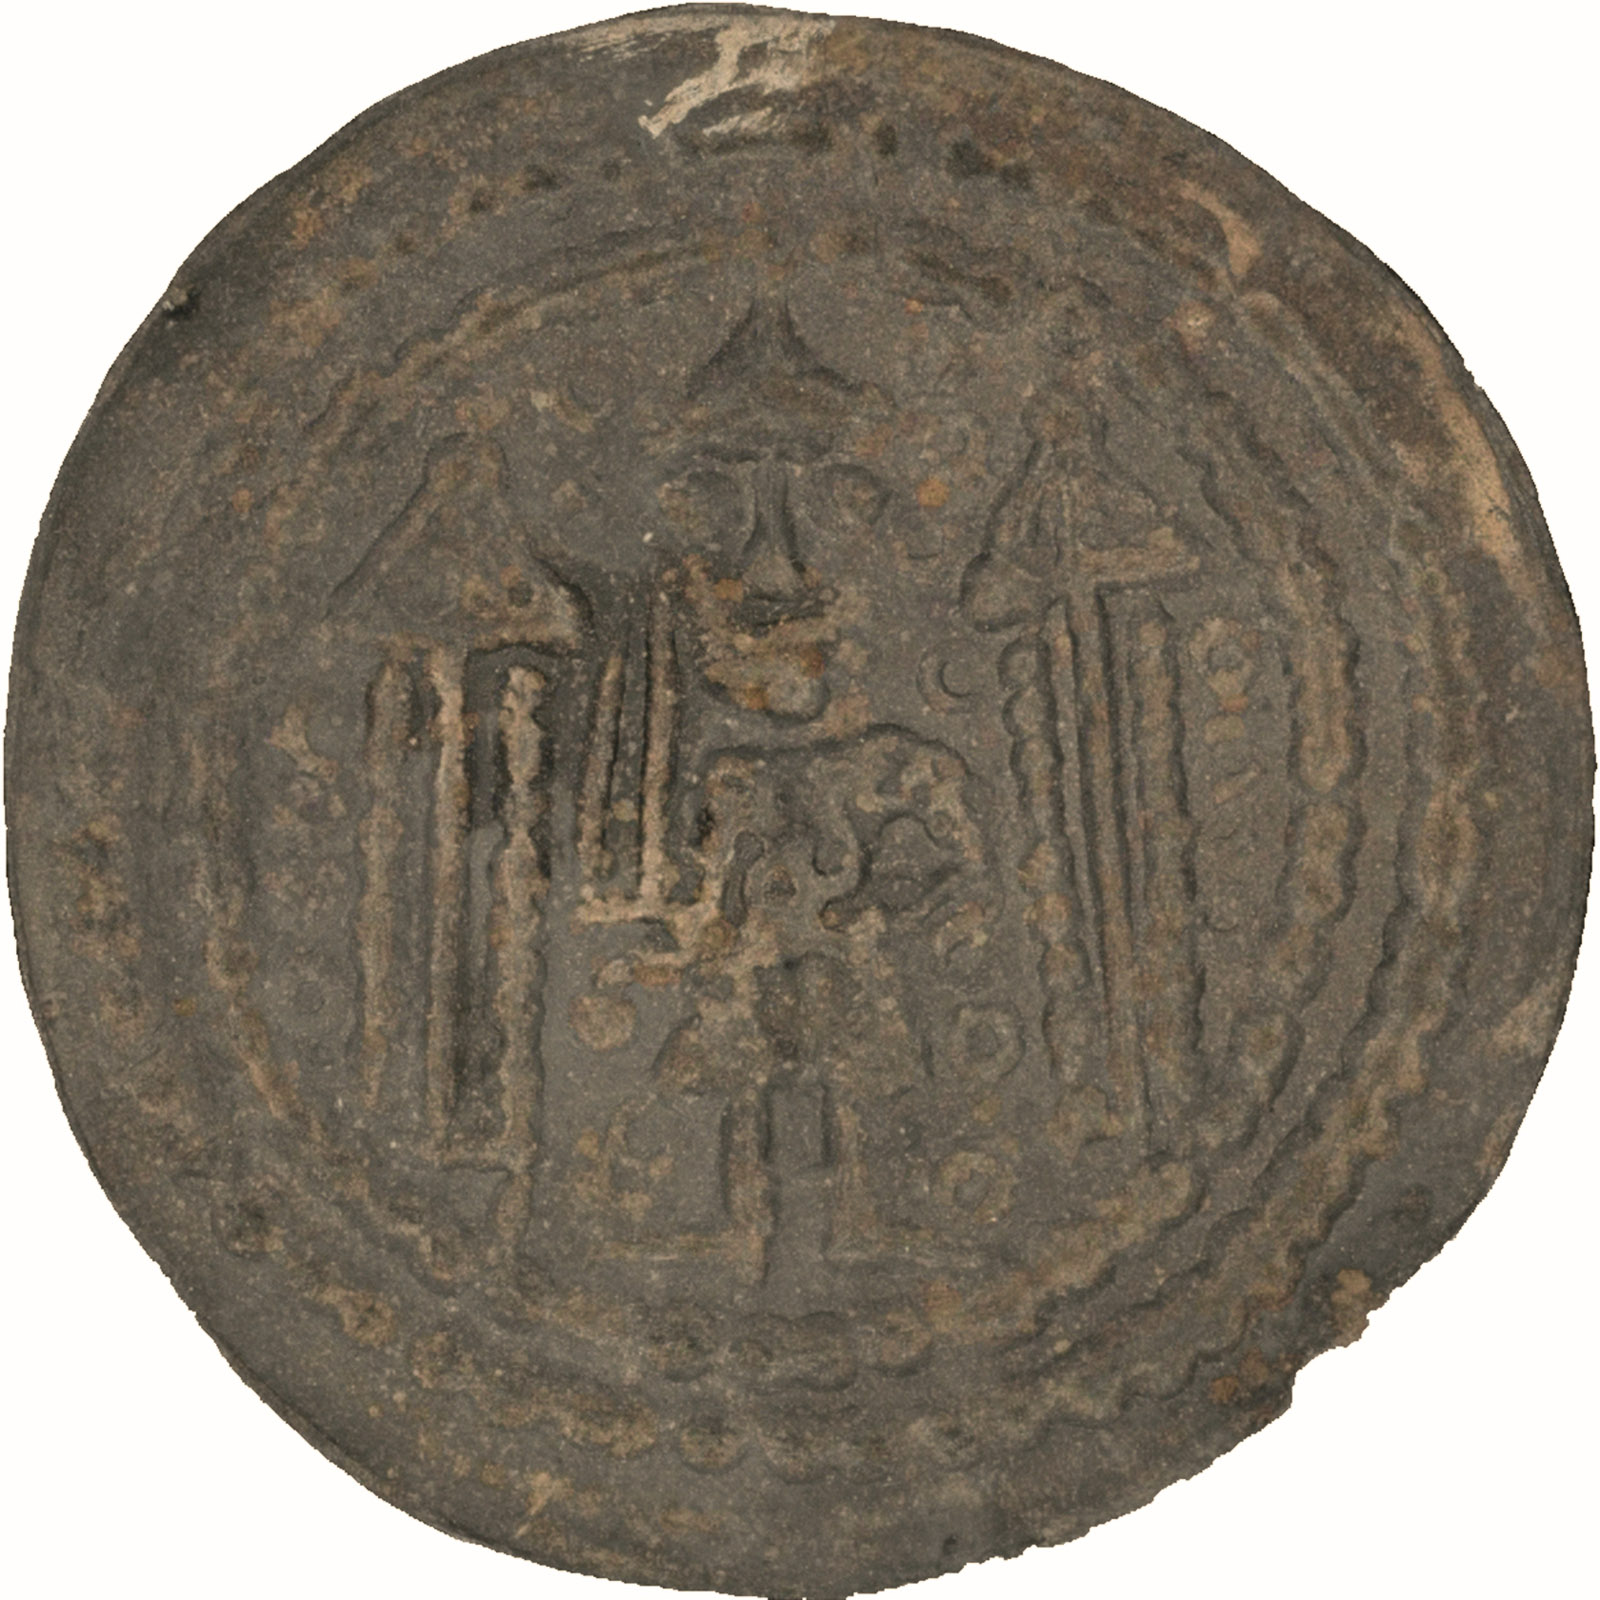 Scan of the base color of a coin issued by Konrad, Margrave of Meissen and holder of the coinage prerogative, mint date ca. 1150